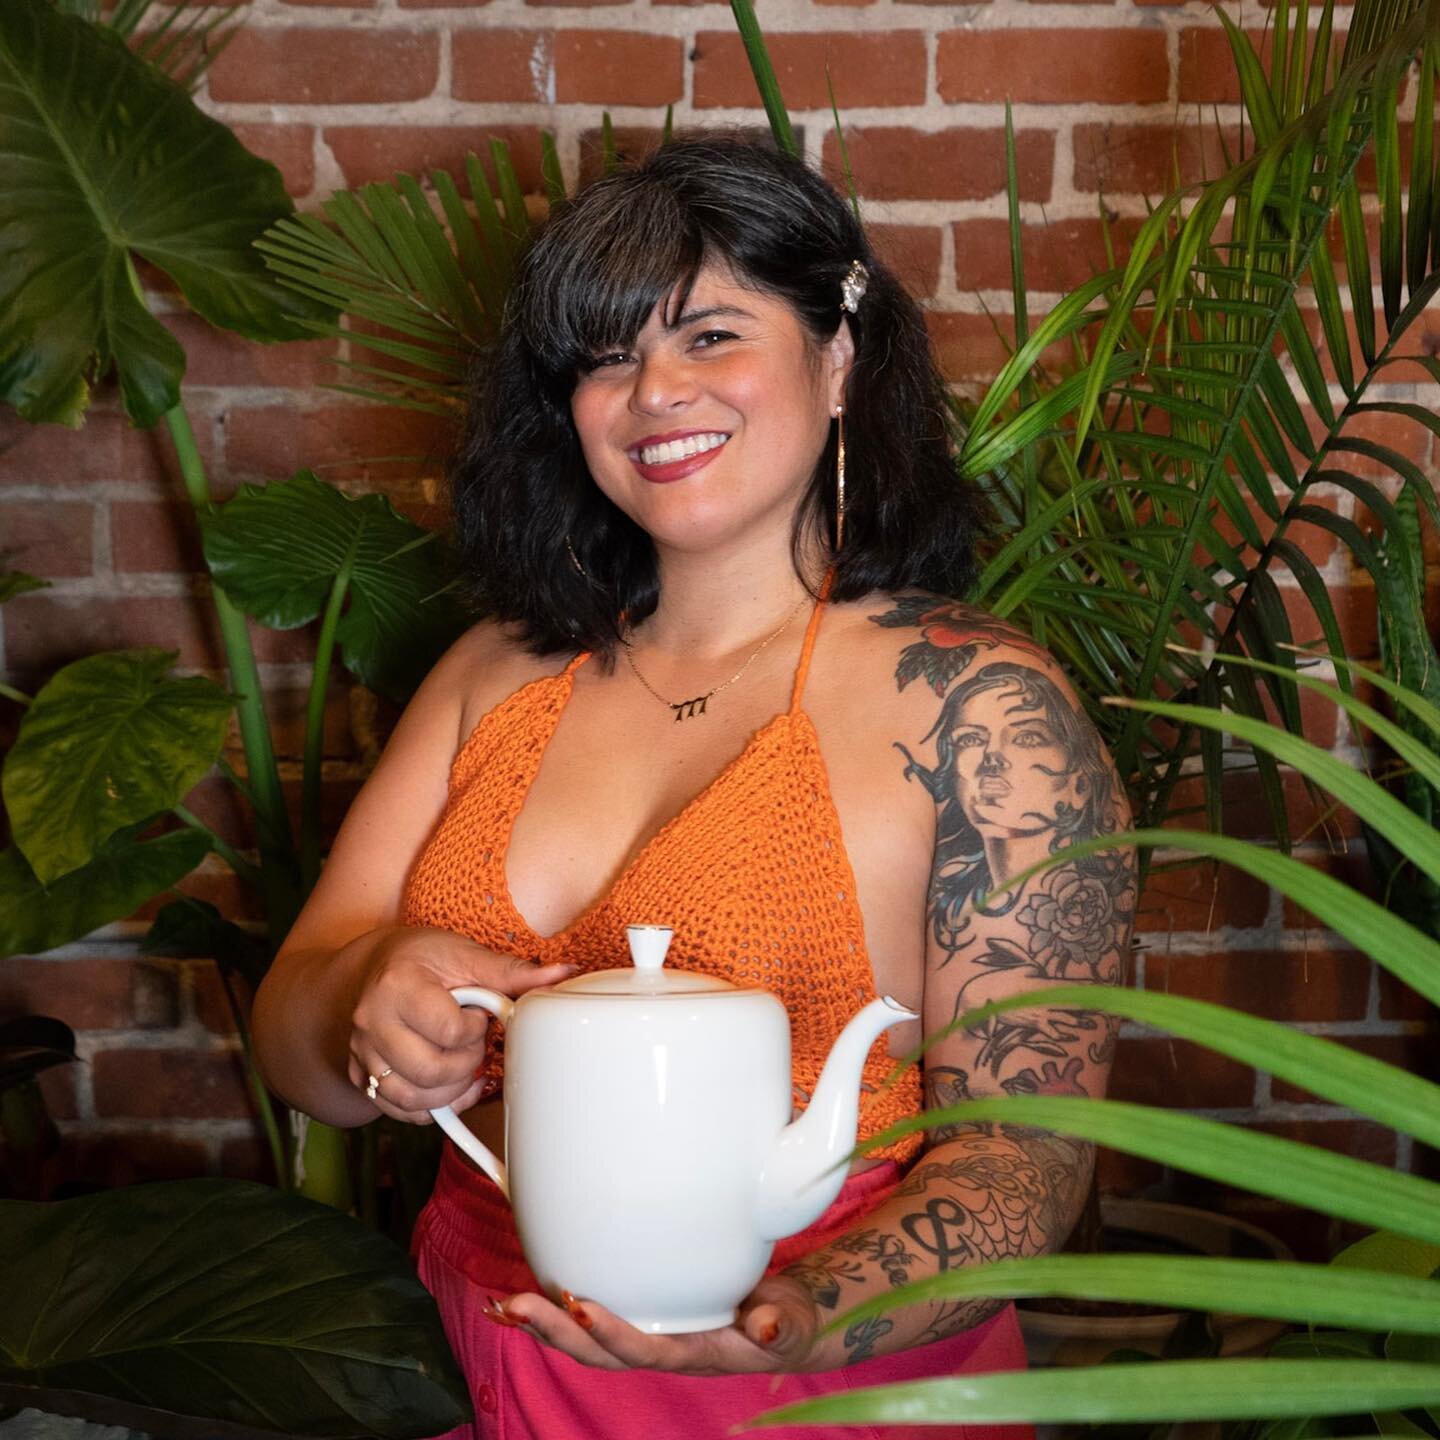 Come &amp; experience Hxgh Tea the Cali way. Tea paired with Doja &amp; fancy snacks &amp; dope playlists have been a cultural staple for us forever! 
+
Gift of Doja&rsquo;s Hxgh Tea Party created by founder @nina_parks is an intimate social event fo